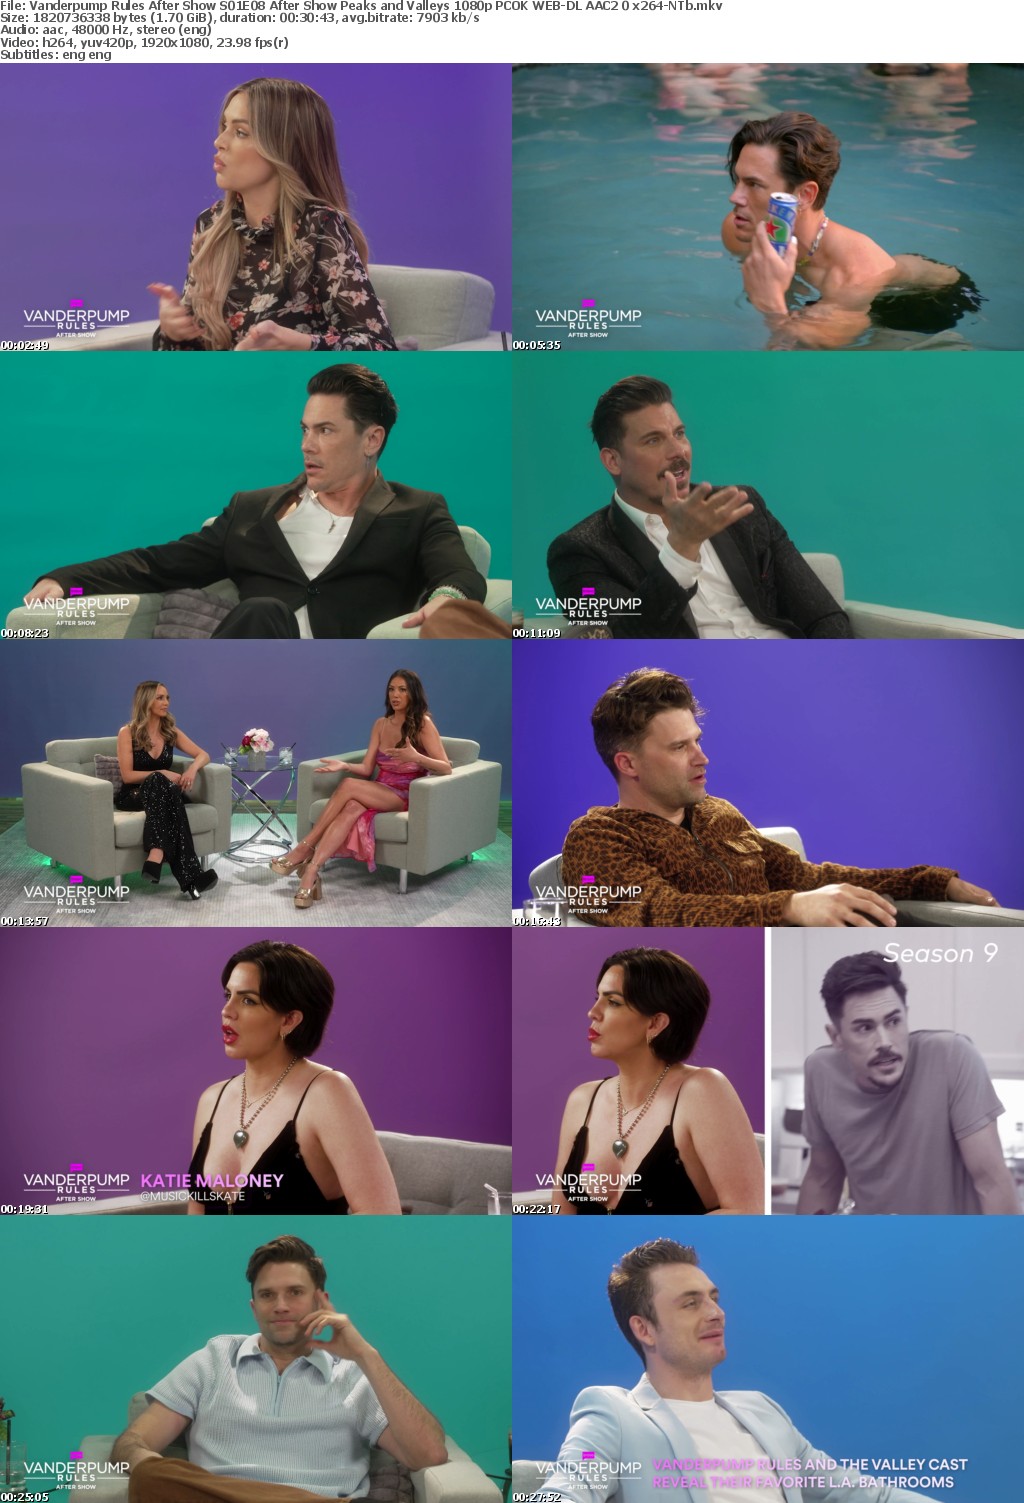 Vanderpump Rules After Show S01E08 After Show Peaks and Valleys 1080p PCOK WEB-DL AAC2 0 x264-NTb